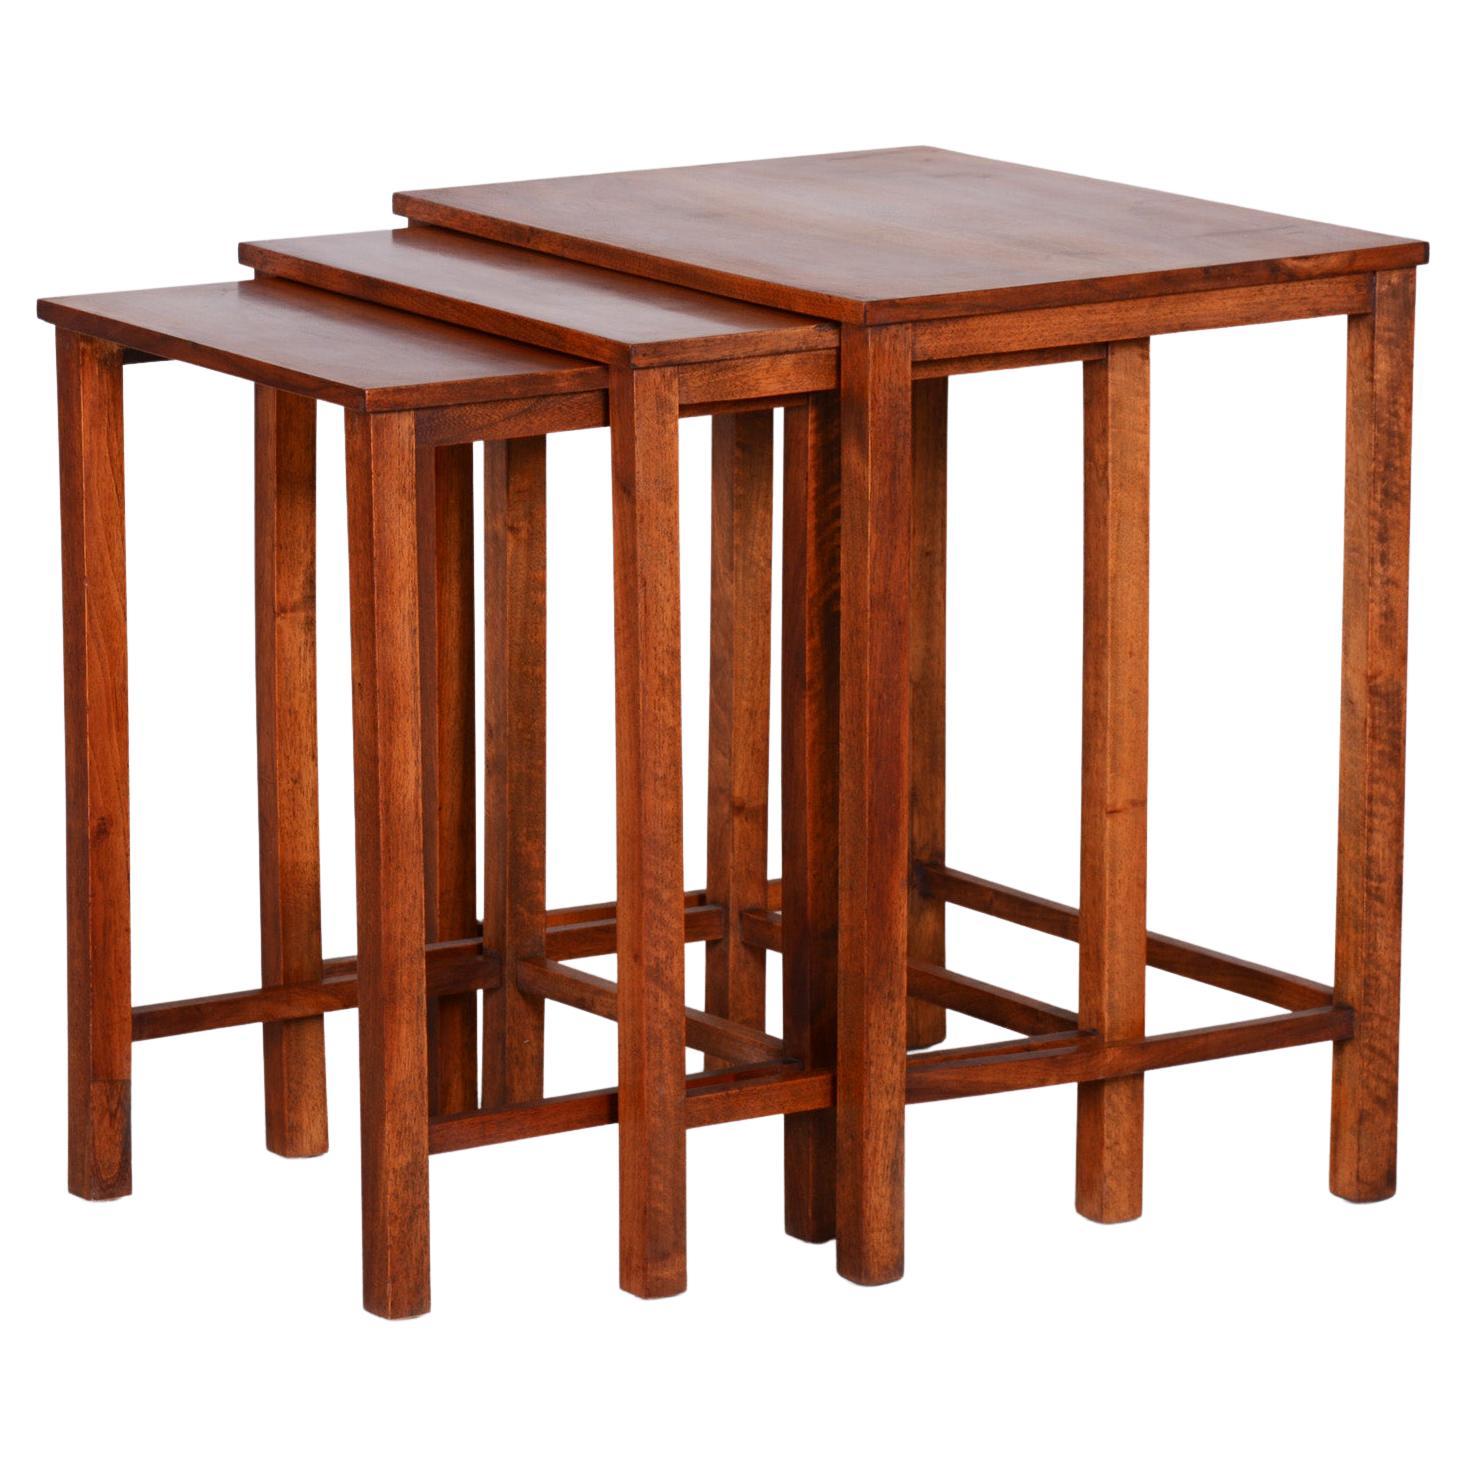 Original Condition Brown Nest Tables Made in the 1930s, Czech